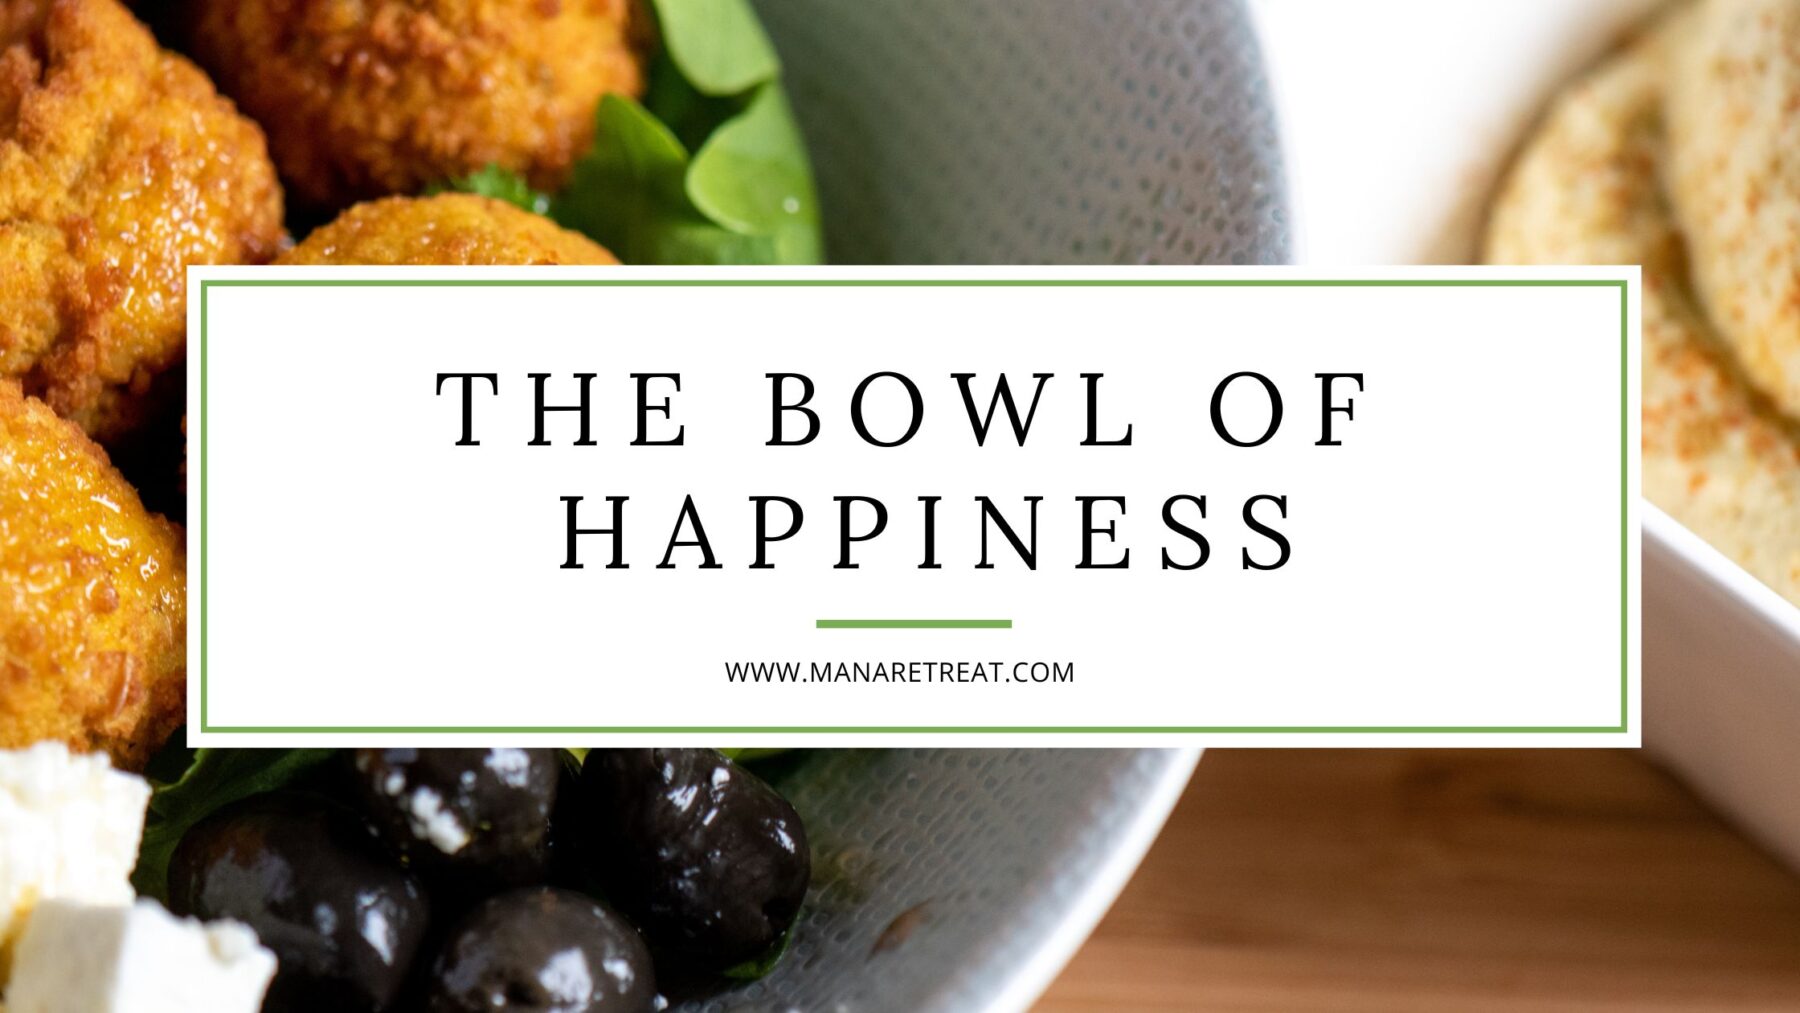 The Bowl of Happiness - Light and Healthy Falafel Salad Recipe for the Summer MANA RETREAT